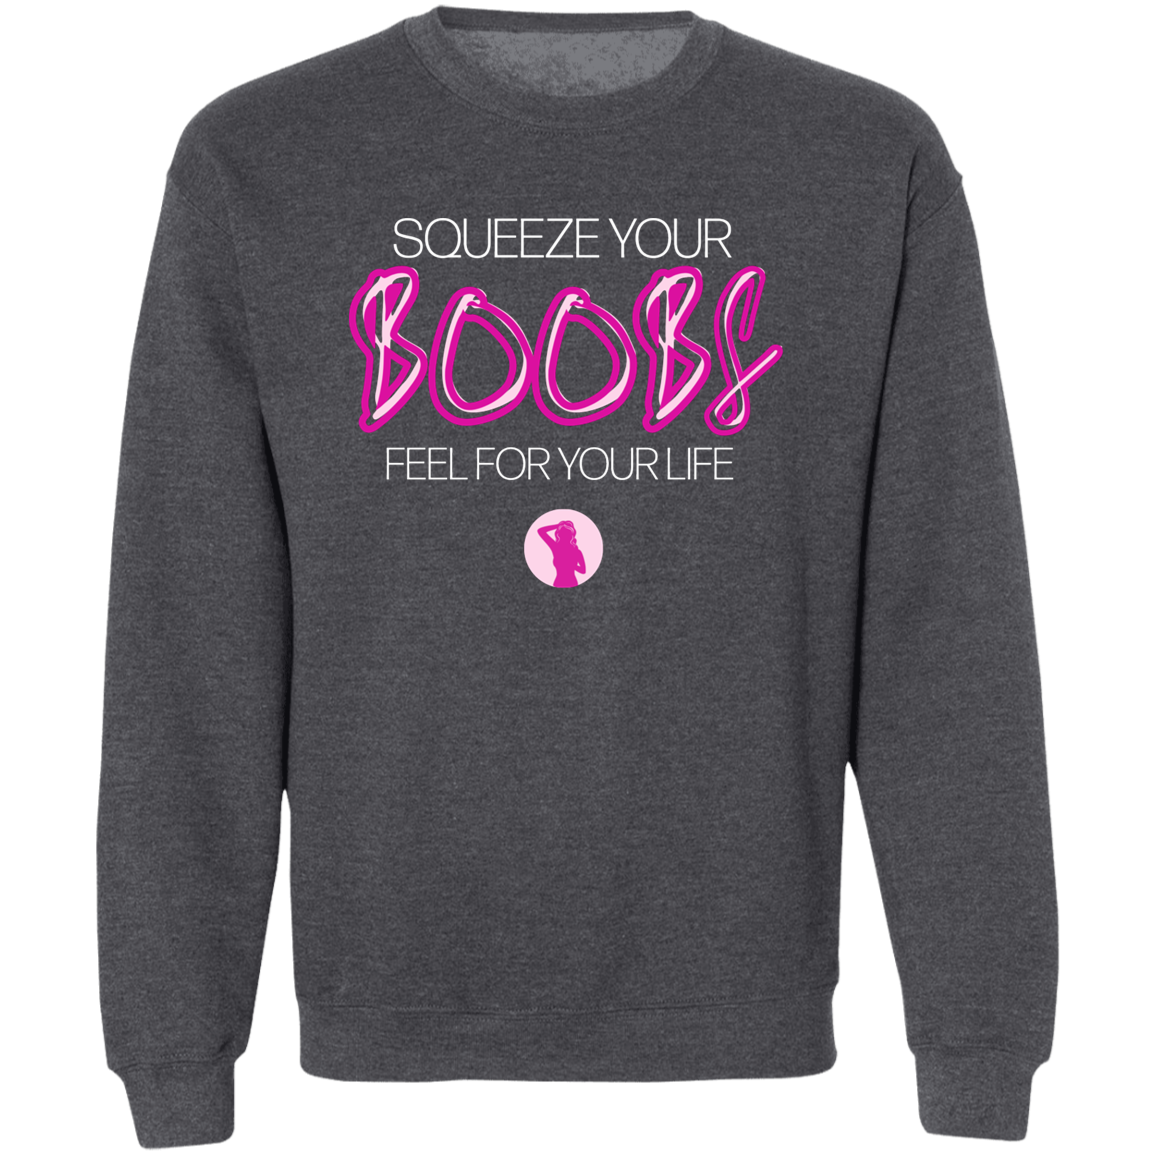 Squeeze Your Boobs Sweater Dark Gray